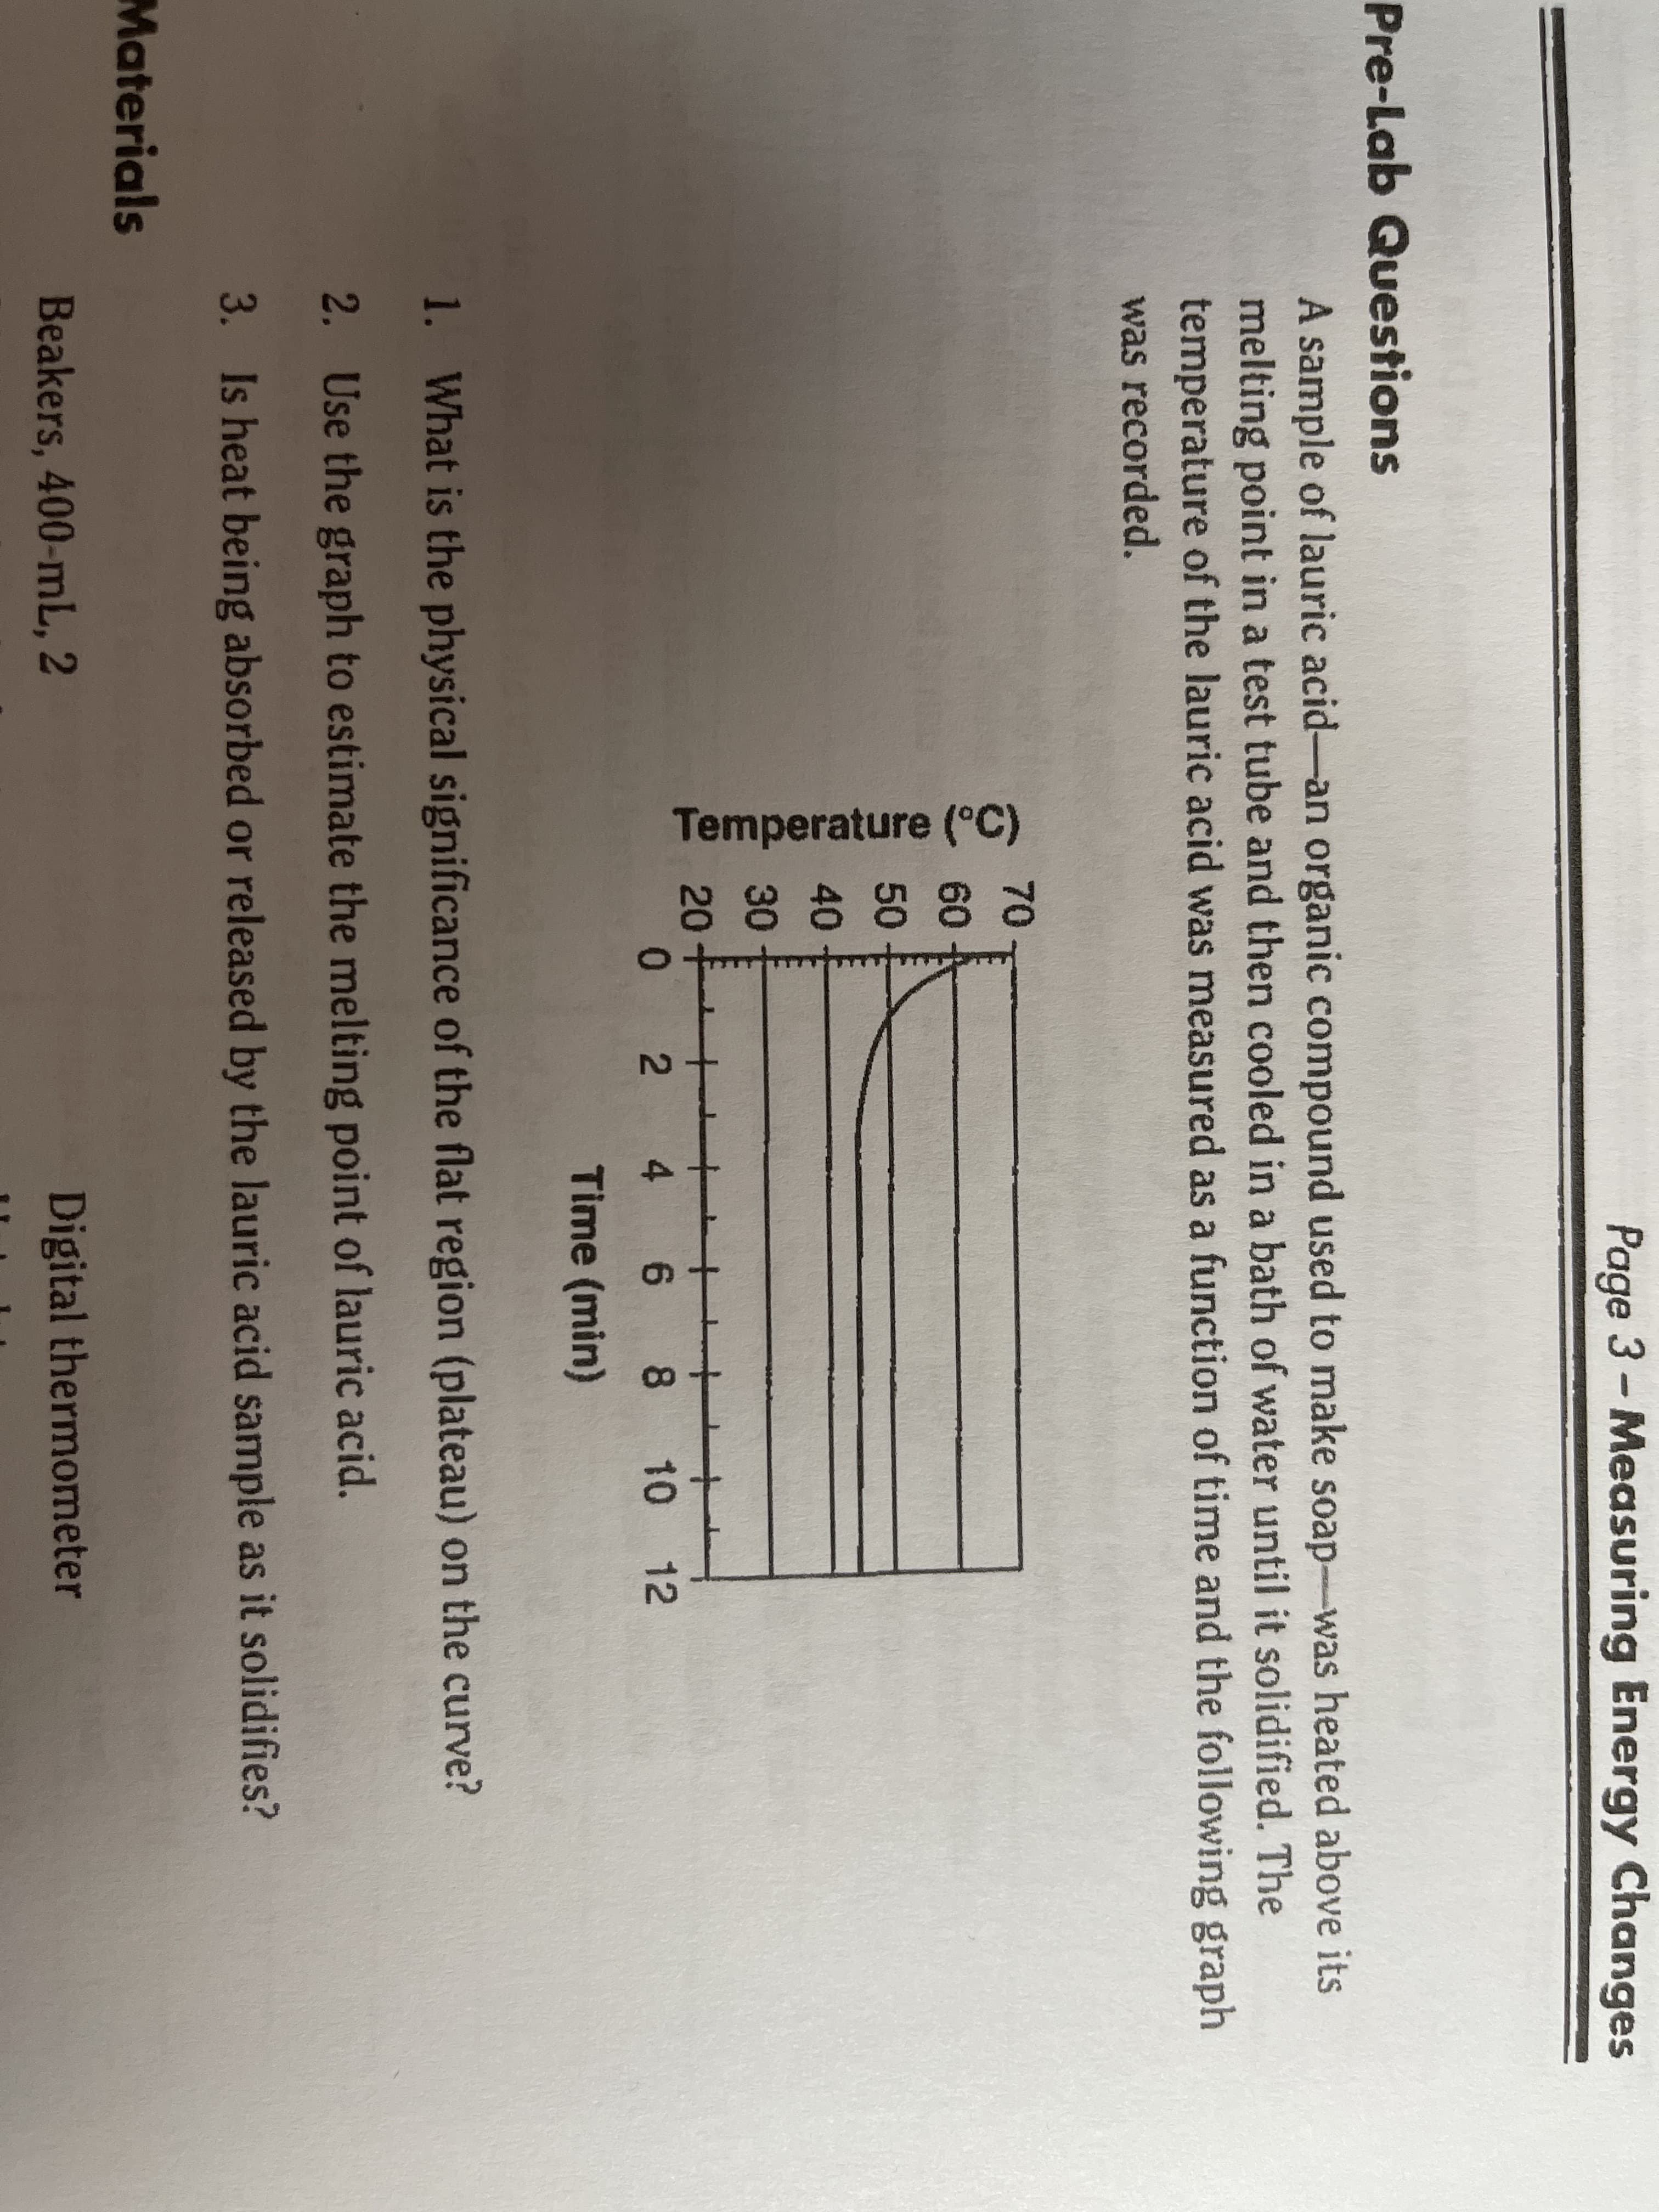 Page 3- Measuring Energy Changes
Pre-Lab Questions
A sample of lauric acid-an organic compound used to make soap-was heated above its
melting point in a test tube and then cooled in a bath of water until it solidified. The
temperature of the lauric acid was measured as a function of time and the following graph
was recorded.
70-
60-
50-
40
30
20-
0 2 4 6 8 10 12
Time (min)
1. What is the physical significance of the flat region (plateau) on the curve?
2. Use the graph to estimate the melting point of lauric acid.
3. Is heat being absorbed or released by the lauric acid sample as it solidifies?
Materials
Beakers, 400-mL, 2
Digital thermonmeter
Temperature (°C)
